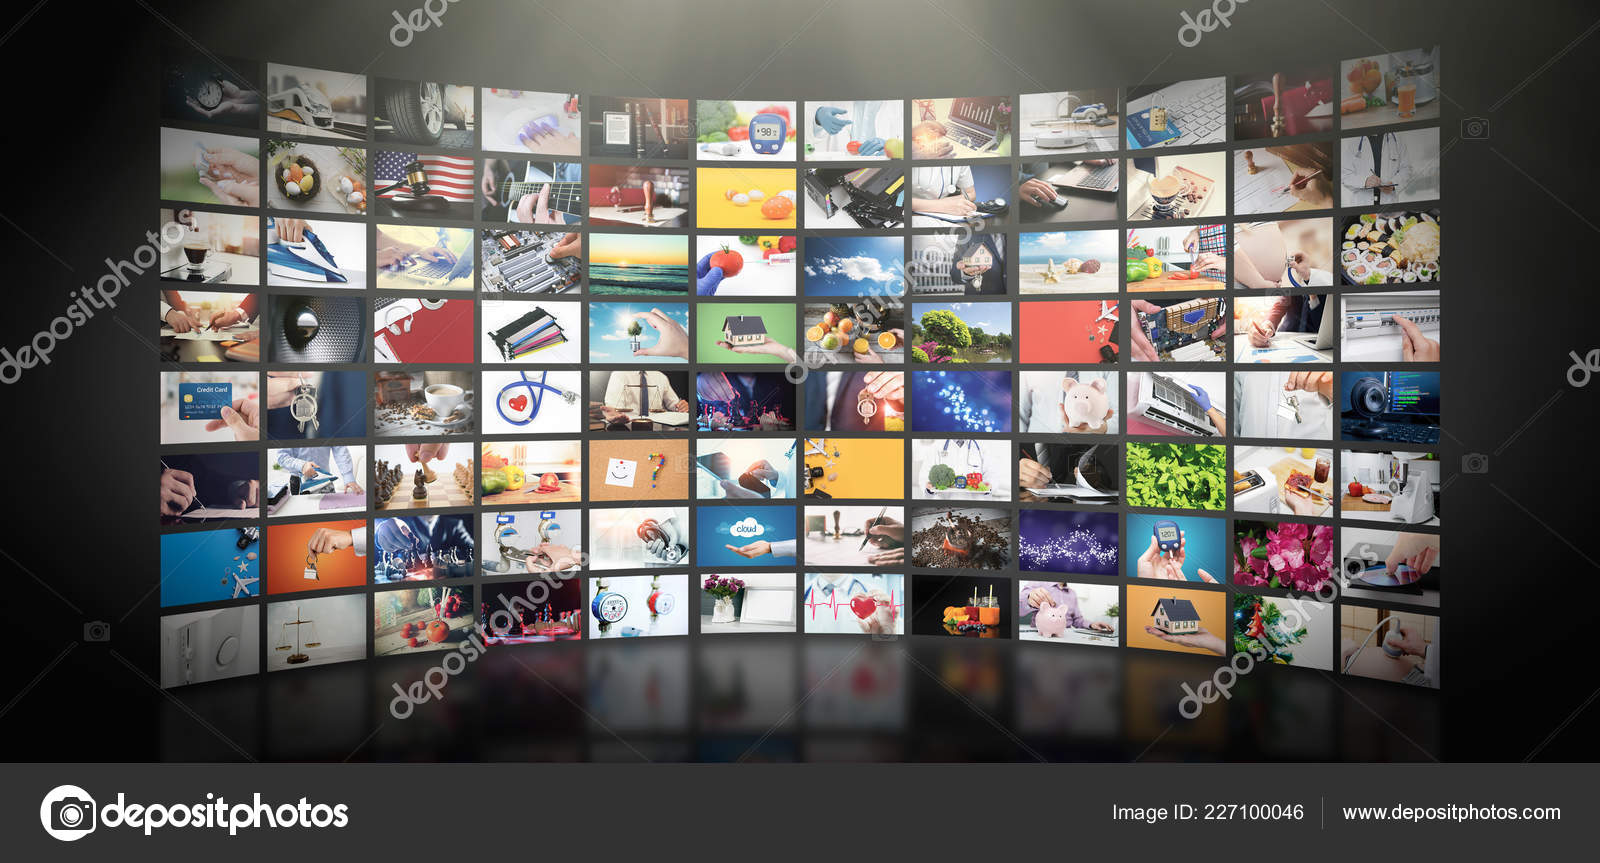 Television Streaming Video Concept Media Video Demand Technology Video Service Stock Photo by ©simpson33 227100046